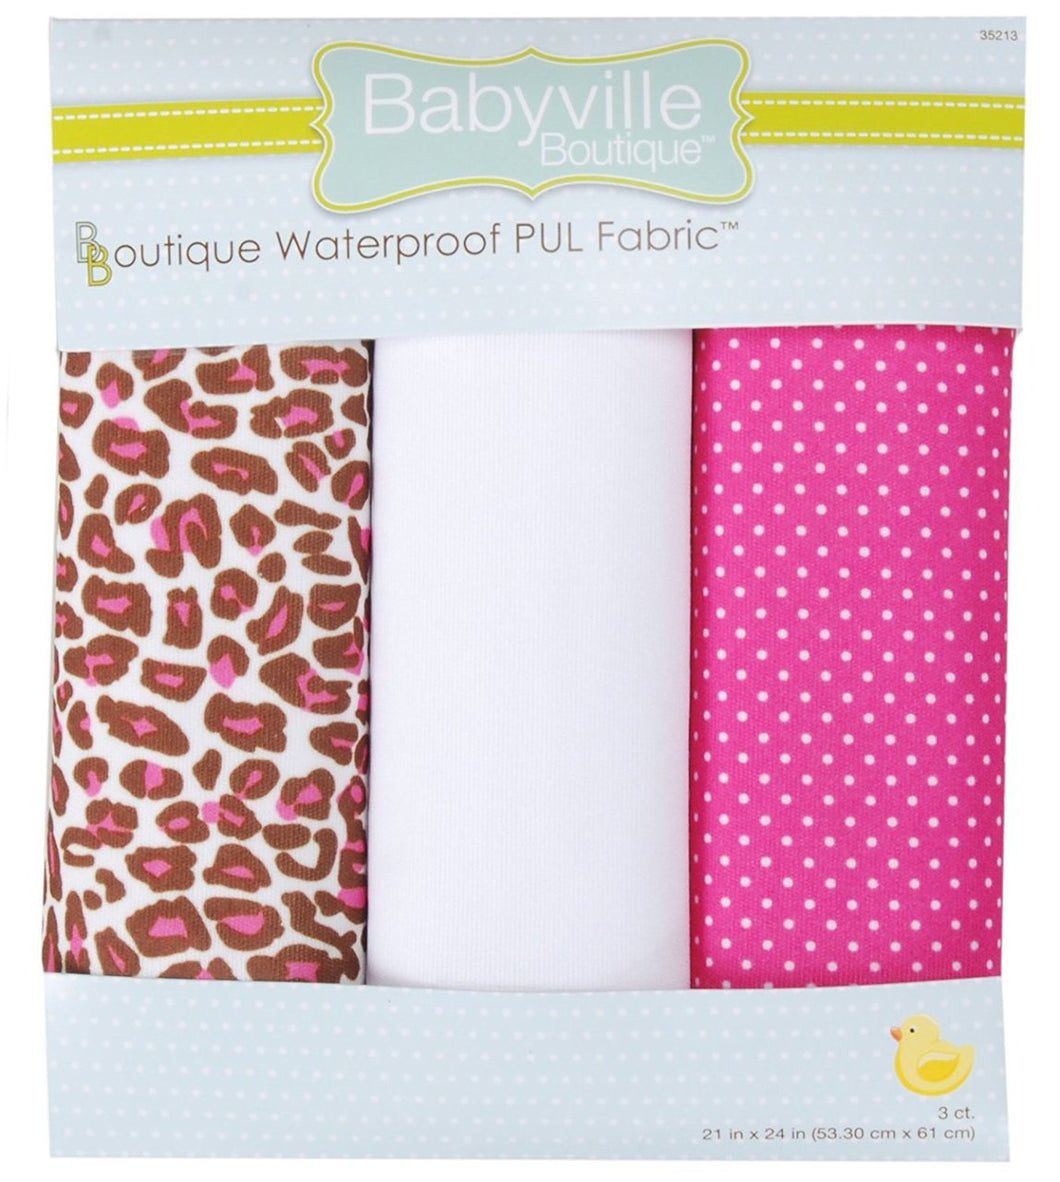 Babyville Boutique Packaged PUL Fabric, Sassy Cheetah and Sassy Dots